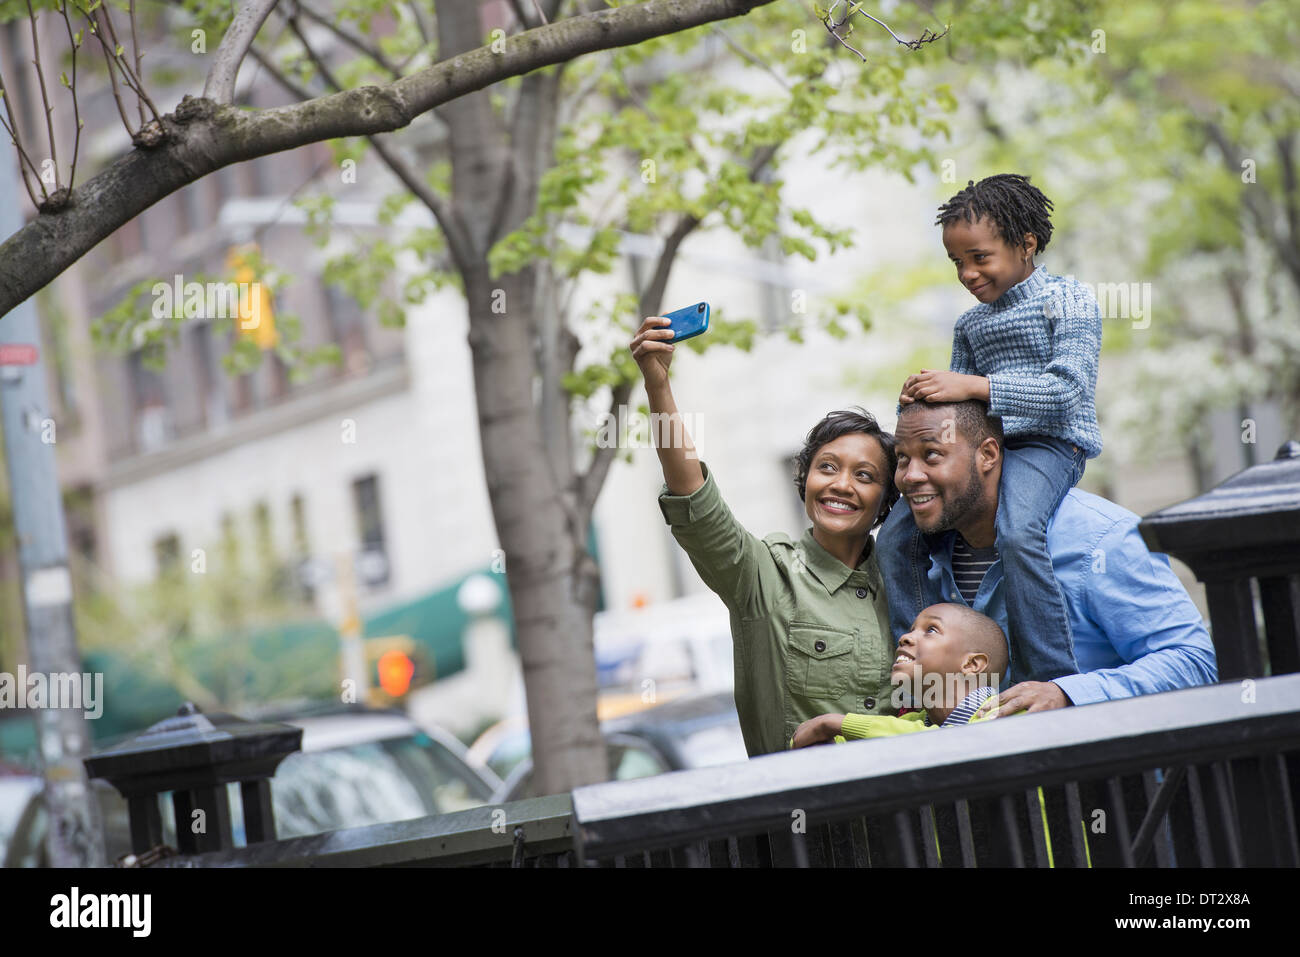 A boy riding on his father's shoulders and a woman using a smart phone taking a selfy picture Stock Photo